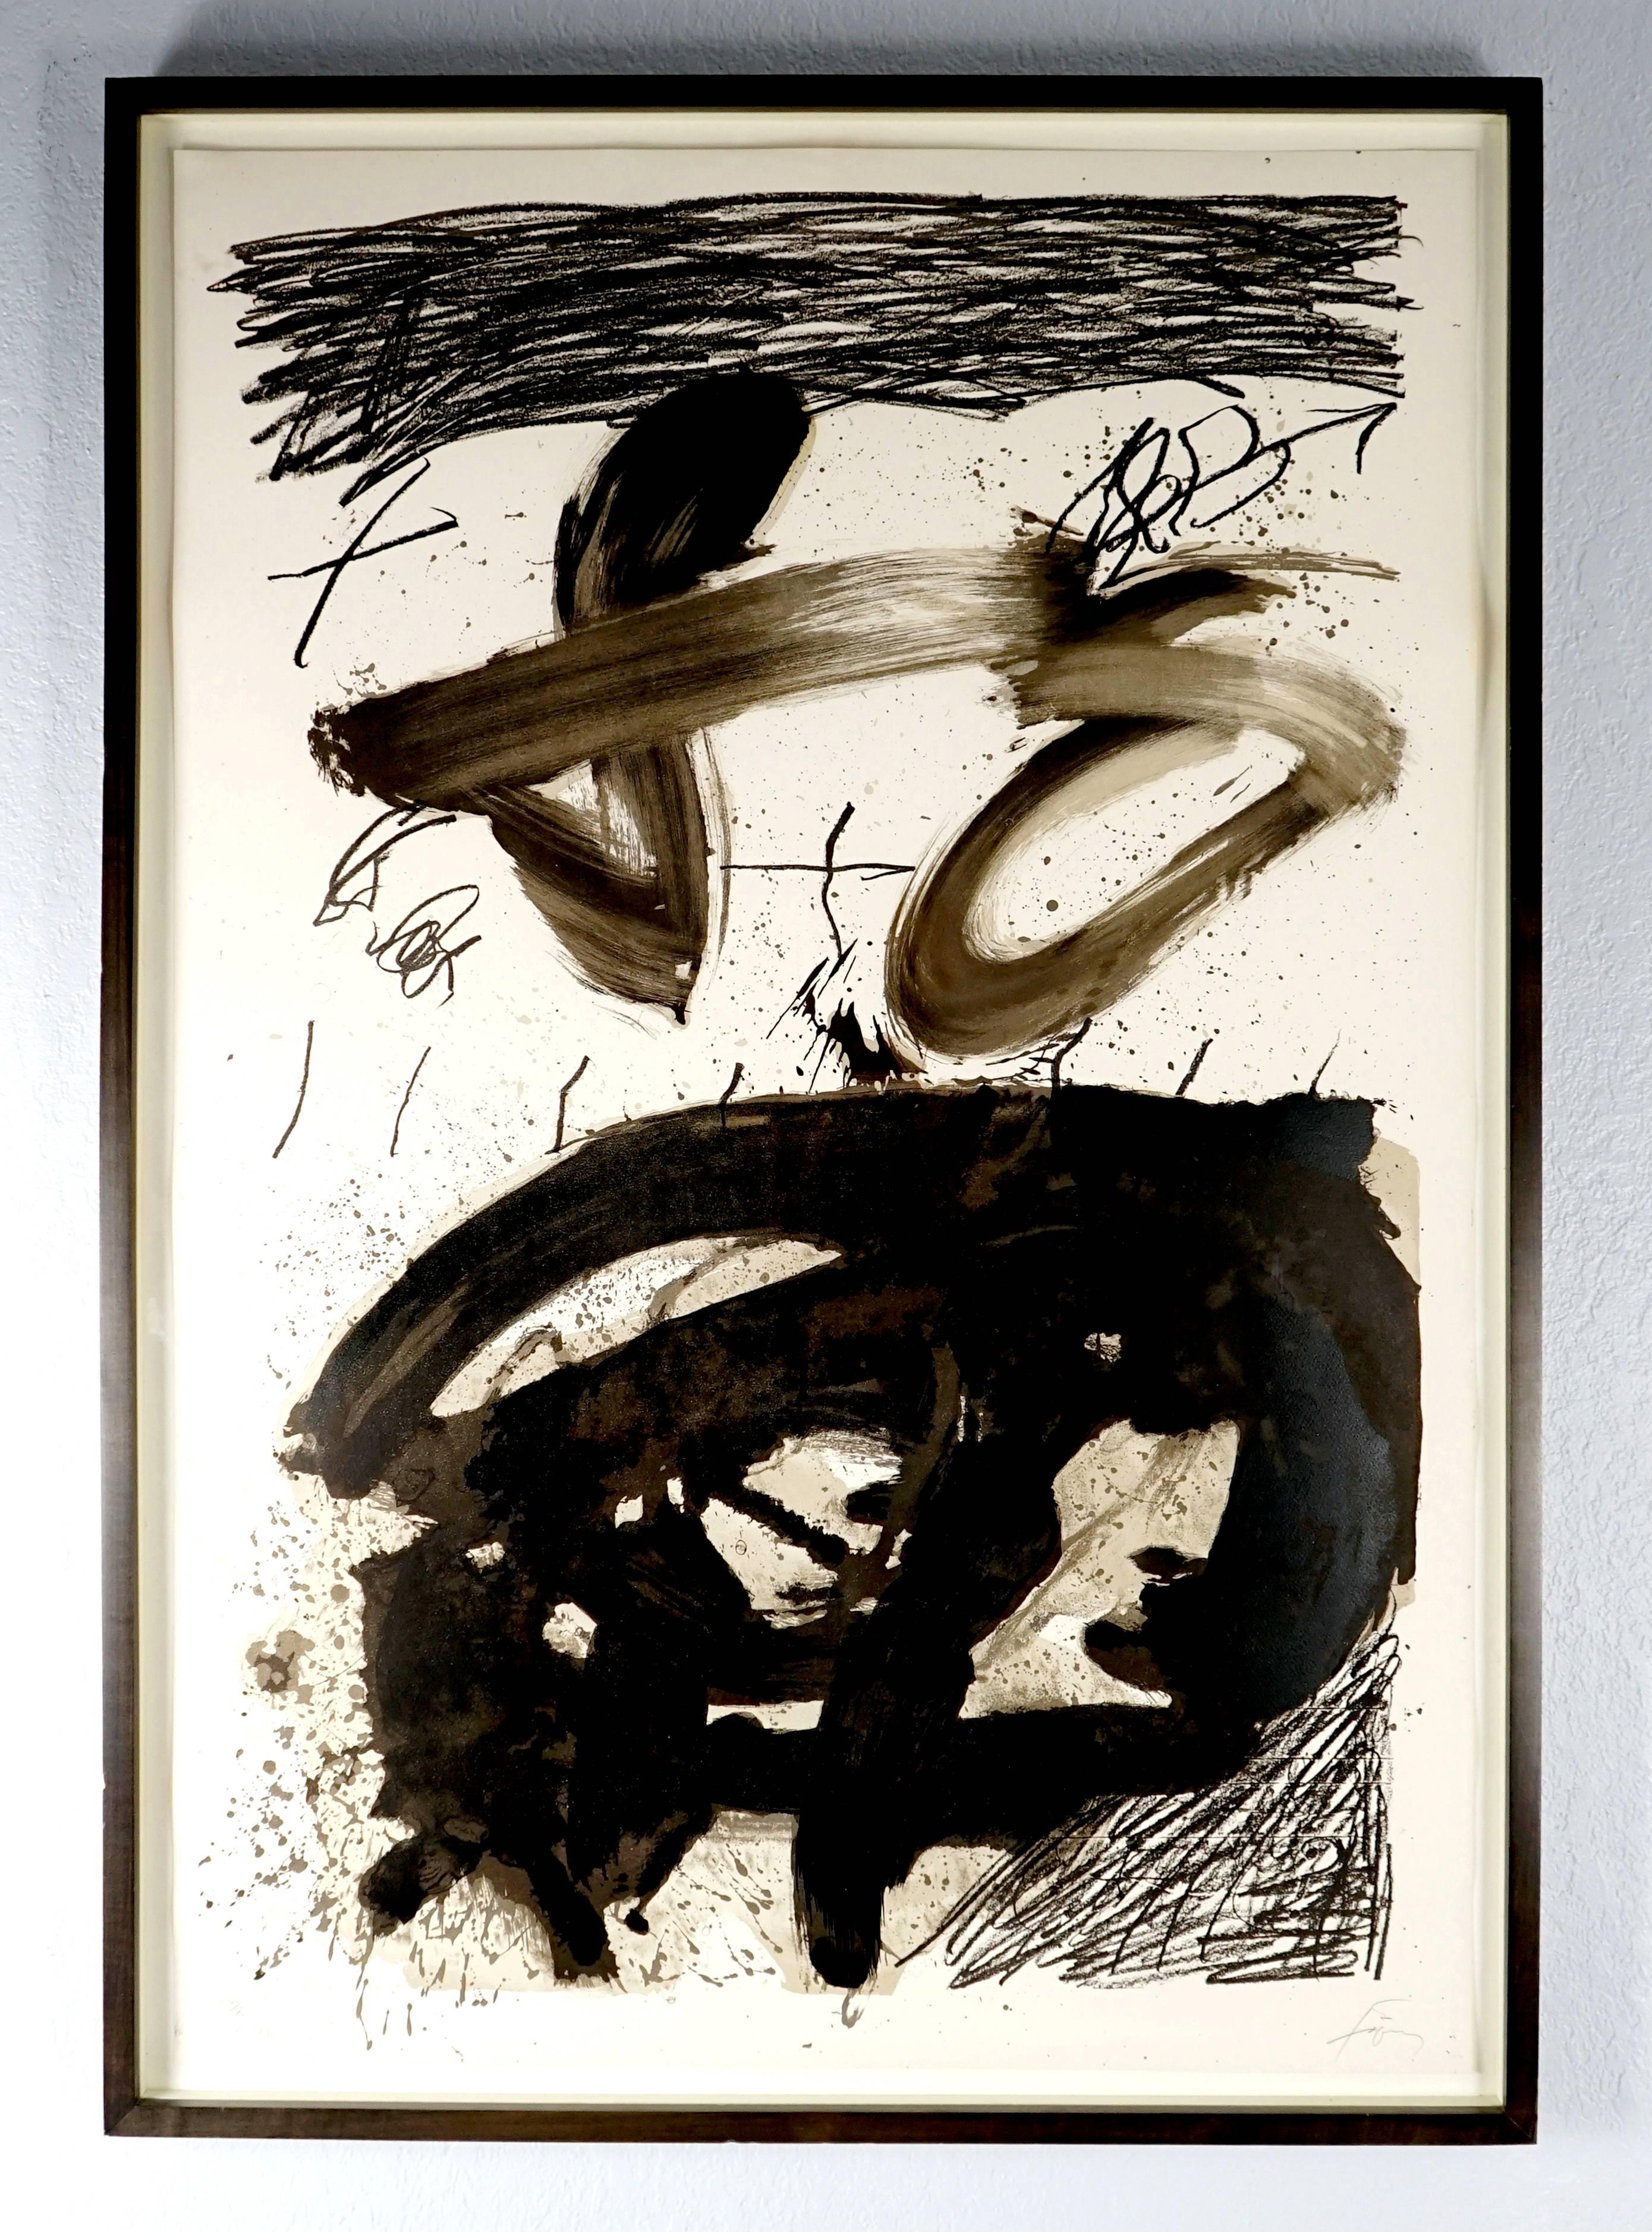 Artist: Antoni Tapies
Title: Calligraphique
Year: 1987
Medium: Lithograph
Signed and numbered 40/75
In excellent condition. 
Dimensions: Sheet: 45 x 30.5 inches, Framed dimensions: 48.5 x 33.5 x 2 inches. Beautifully framed in dark blackish brown